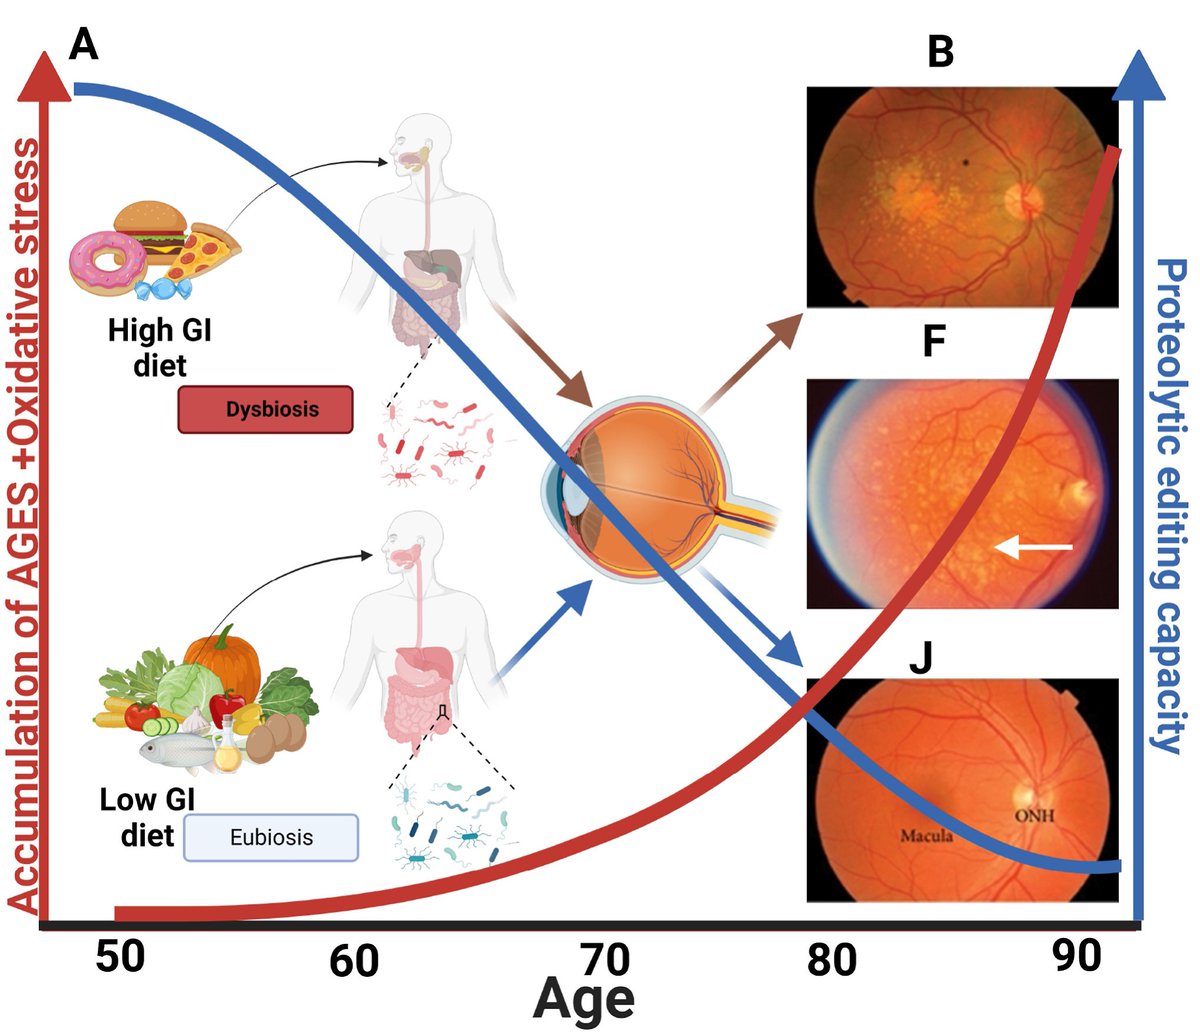 New article in #PRER from Allen Taylor and colleagues from @TuftsNutrition and @uchceu. They explore the links between diet, metabolism and eye disease. Focus is on high glycemic index, glycative stress, AGEs and #maculardegeneration  @ELSneuroscience sciencedirect.com/science/articl…